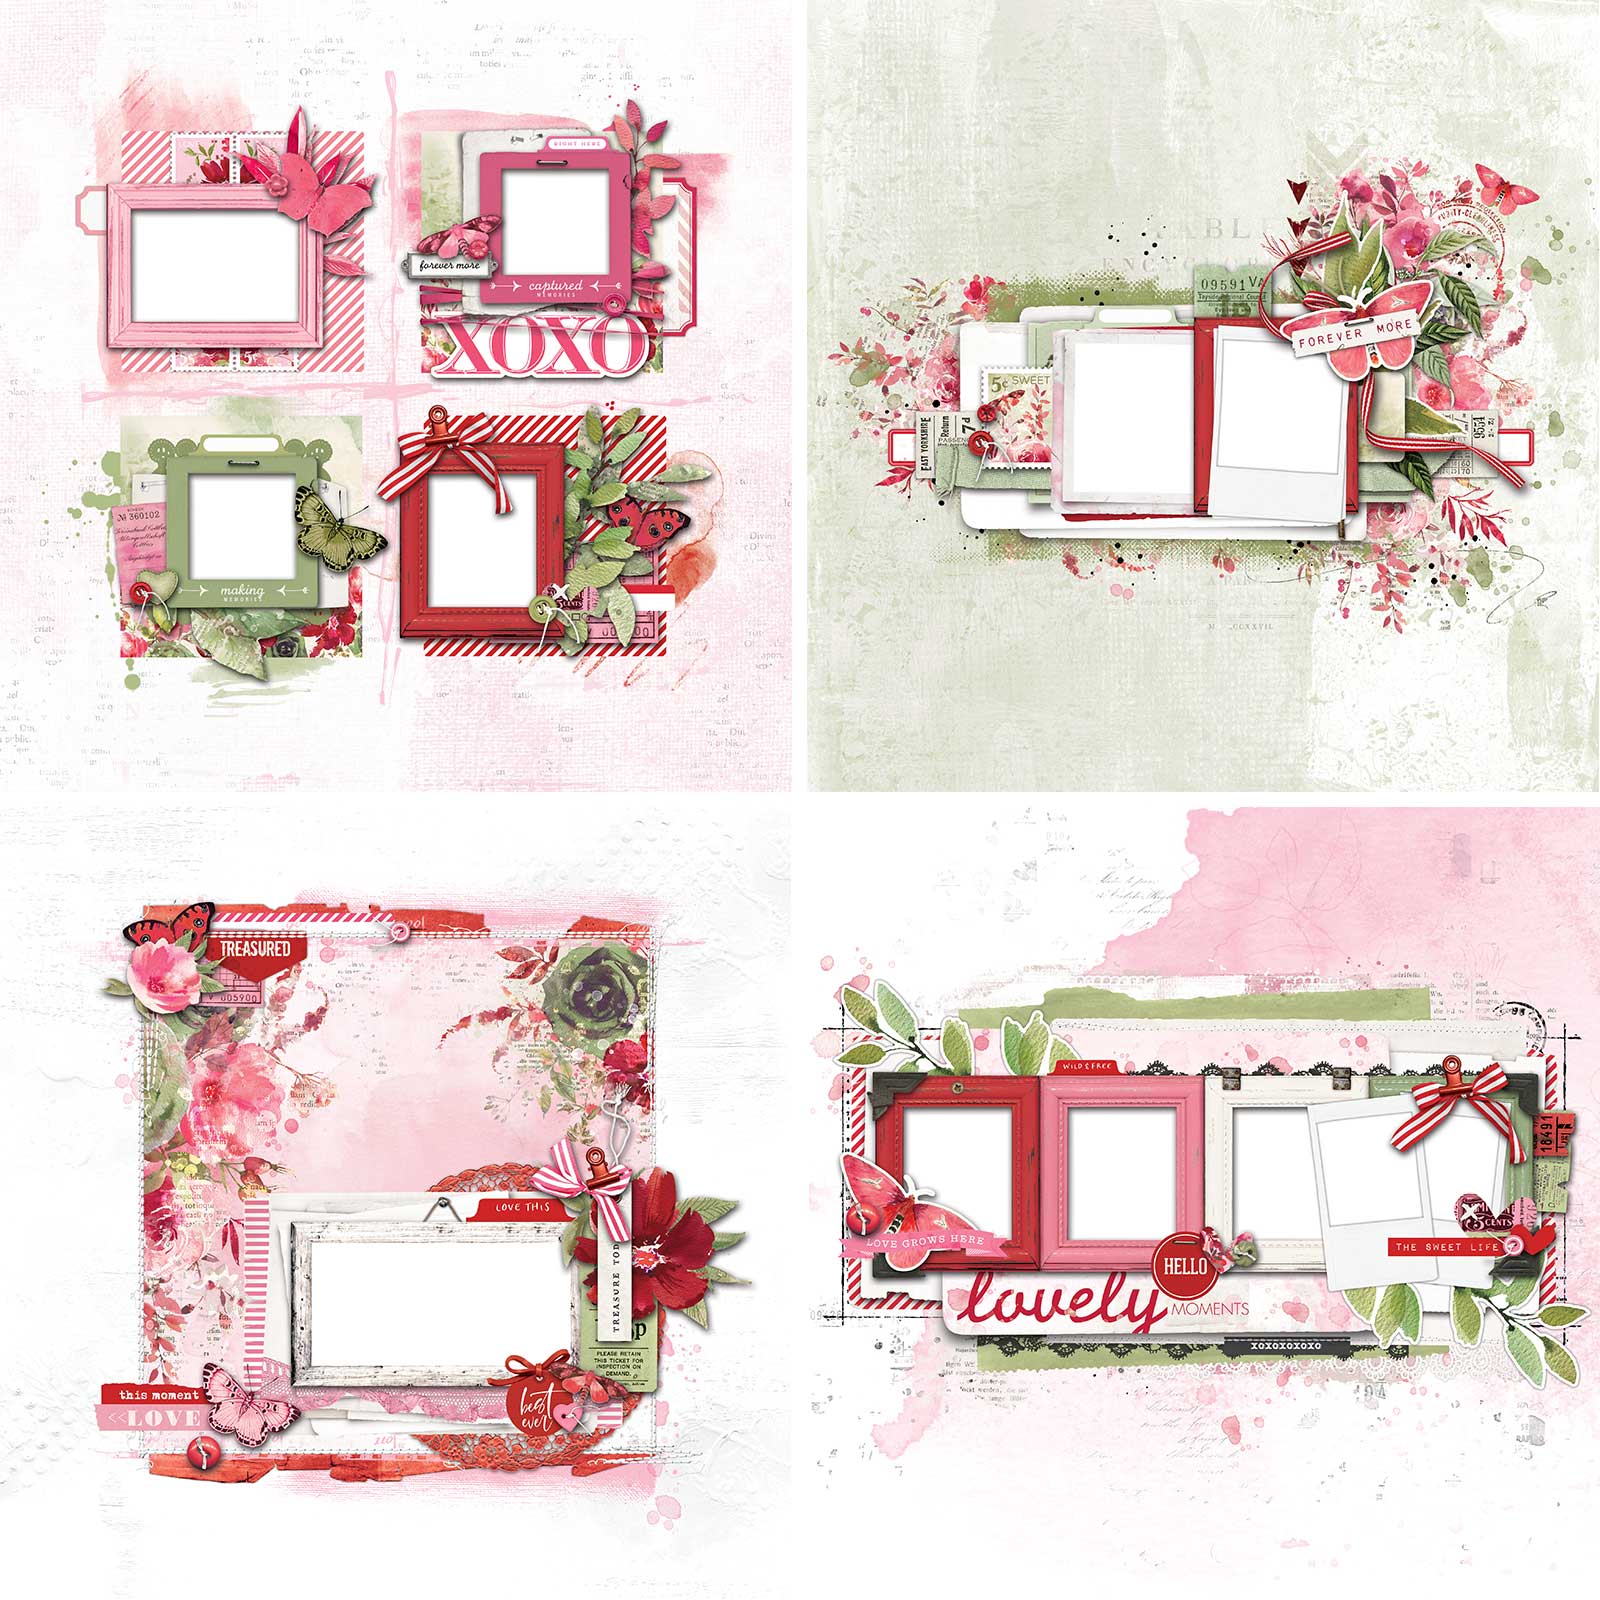 49 and Market ARTOPTIONS ROUGE Card Kit AOR-39371 – Simon Says Stamp